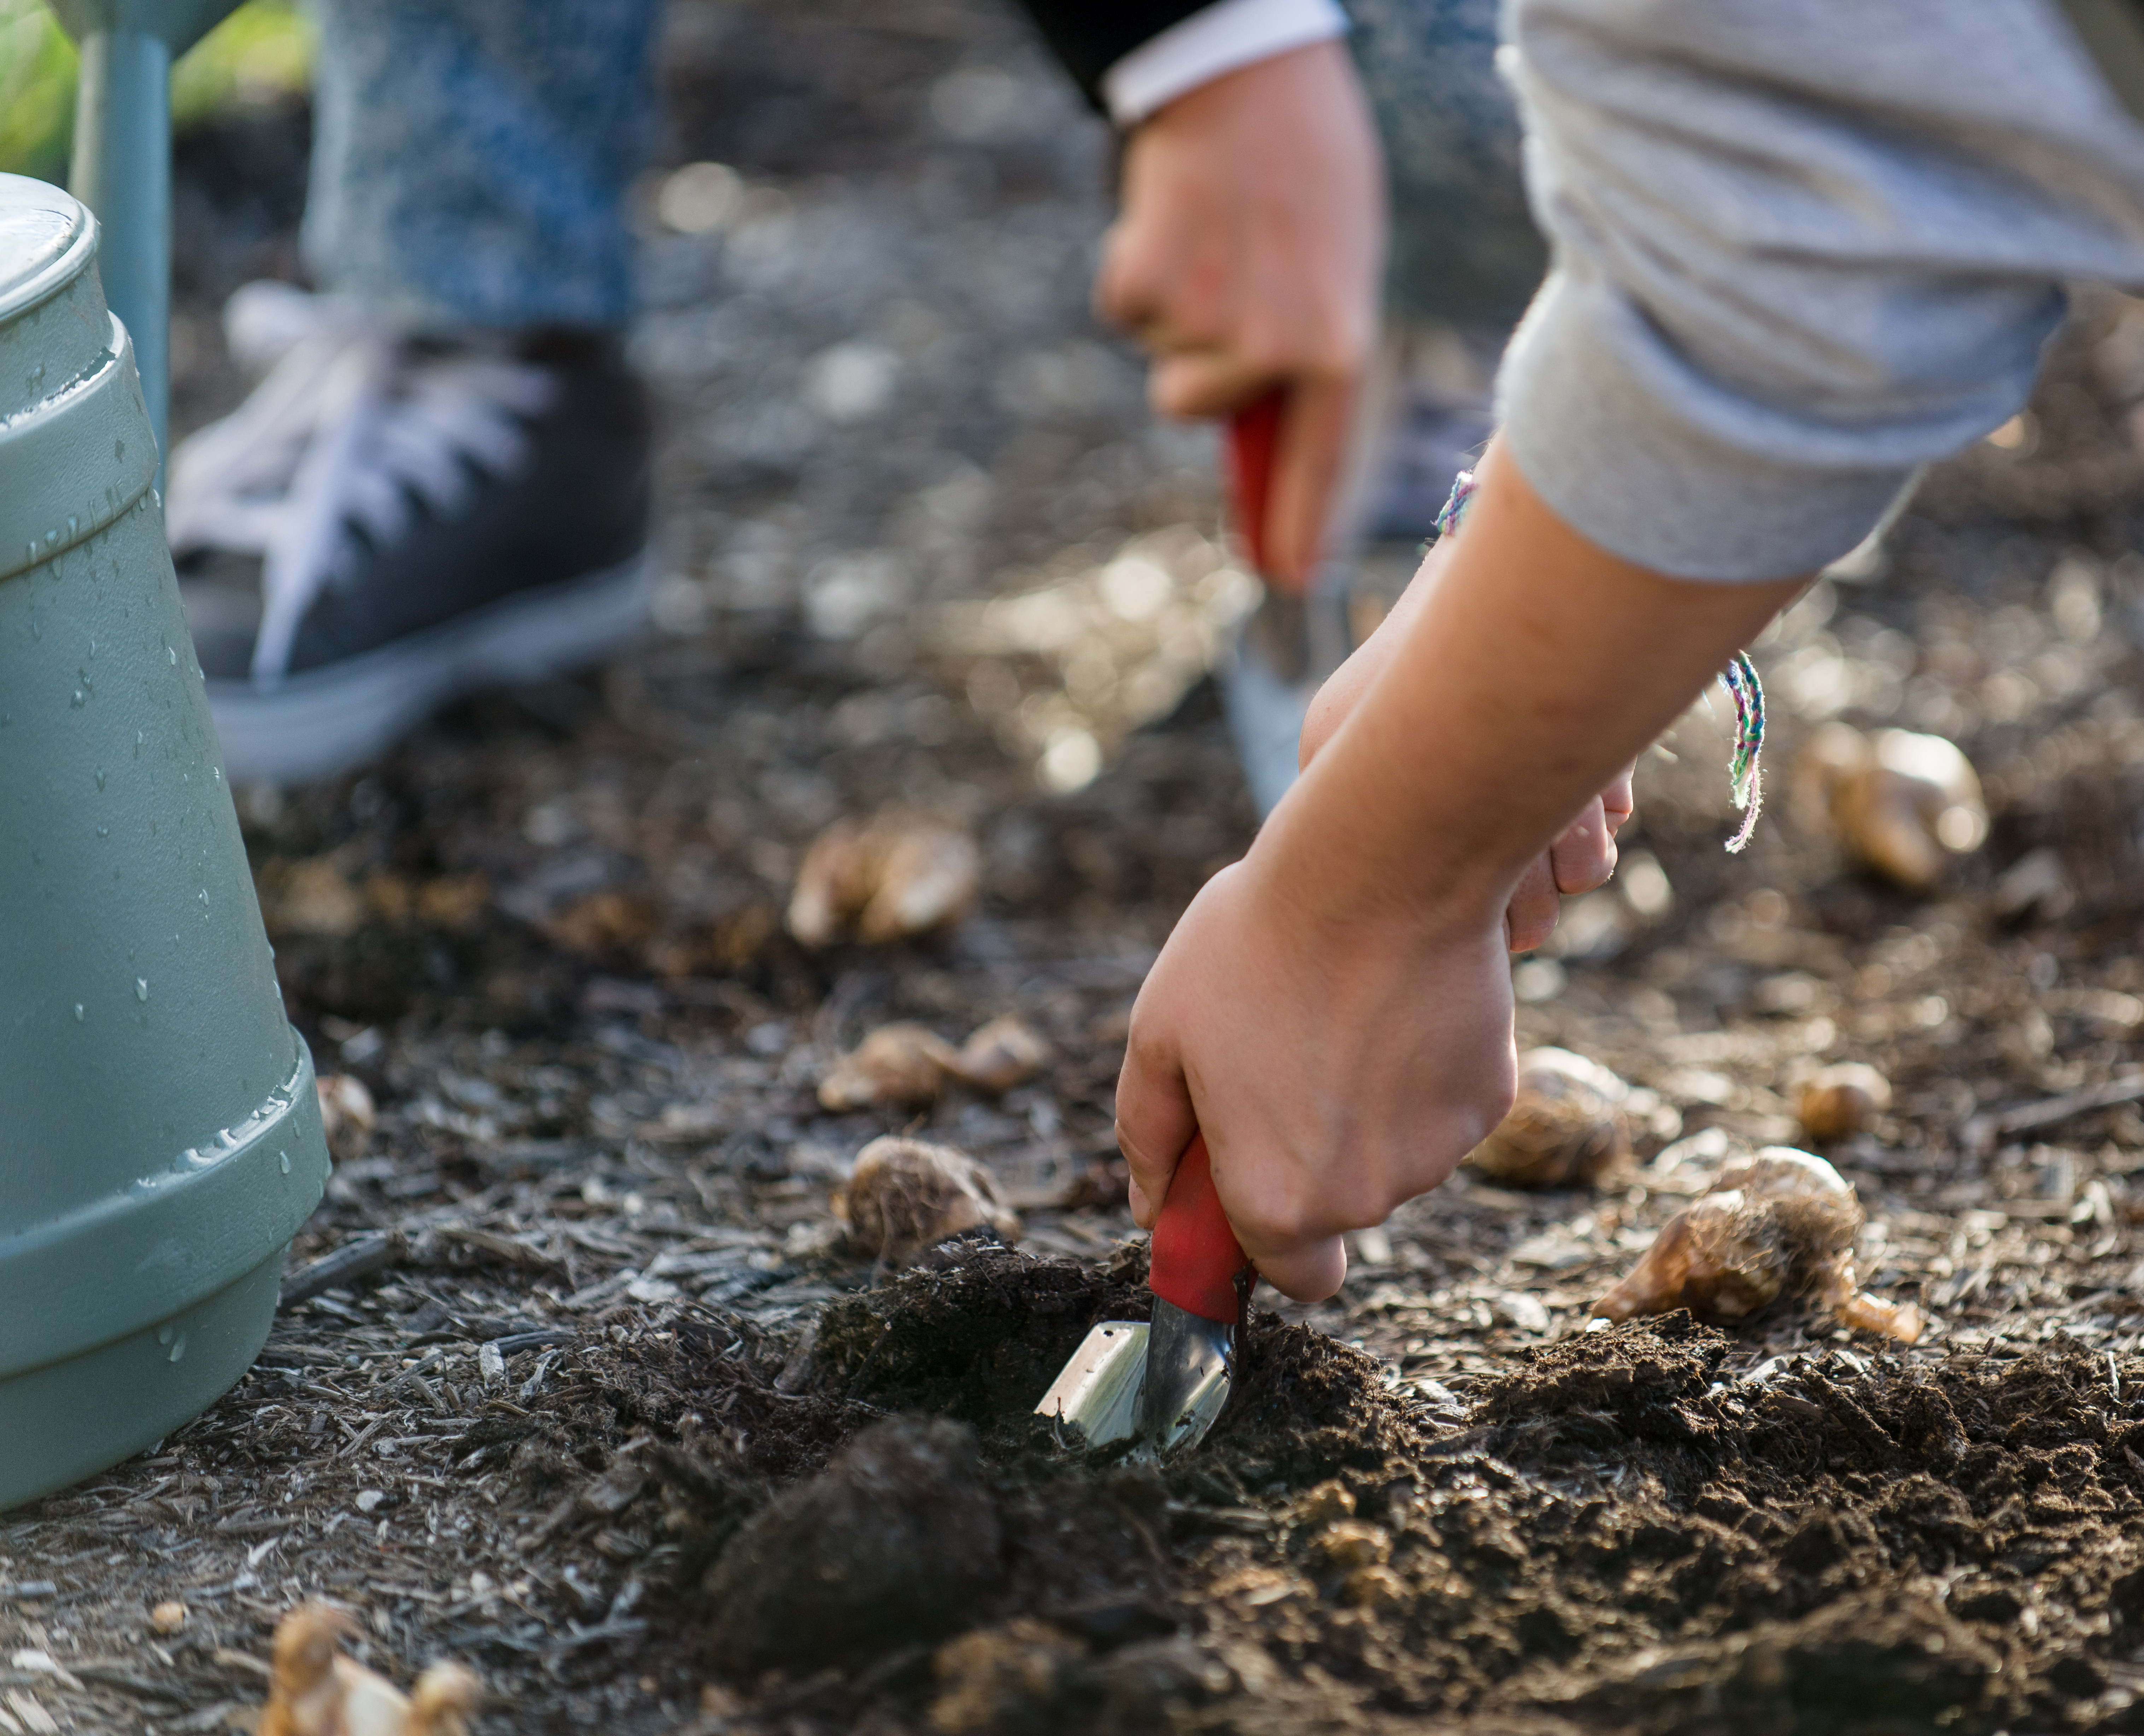 Image of hands holding trowels, digging holes for bulbs in the soil.